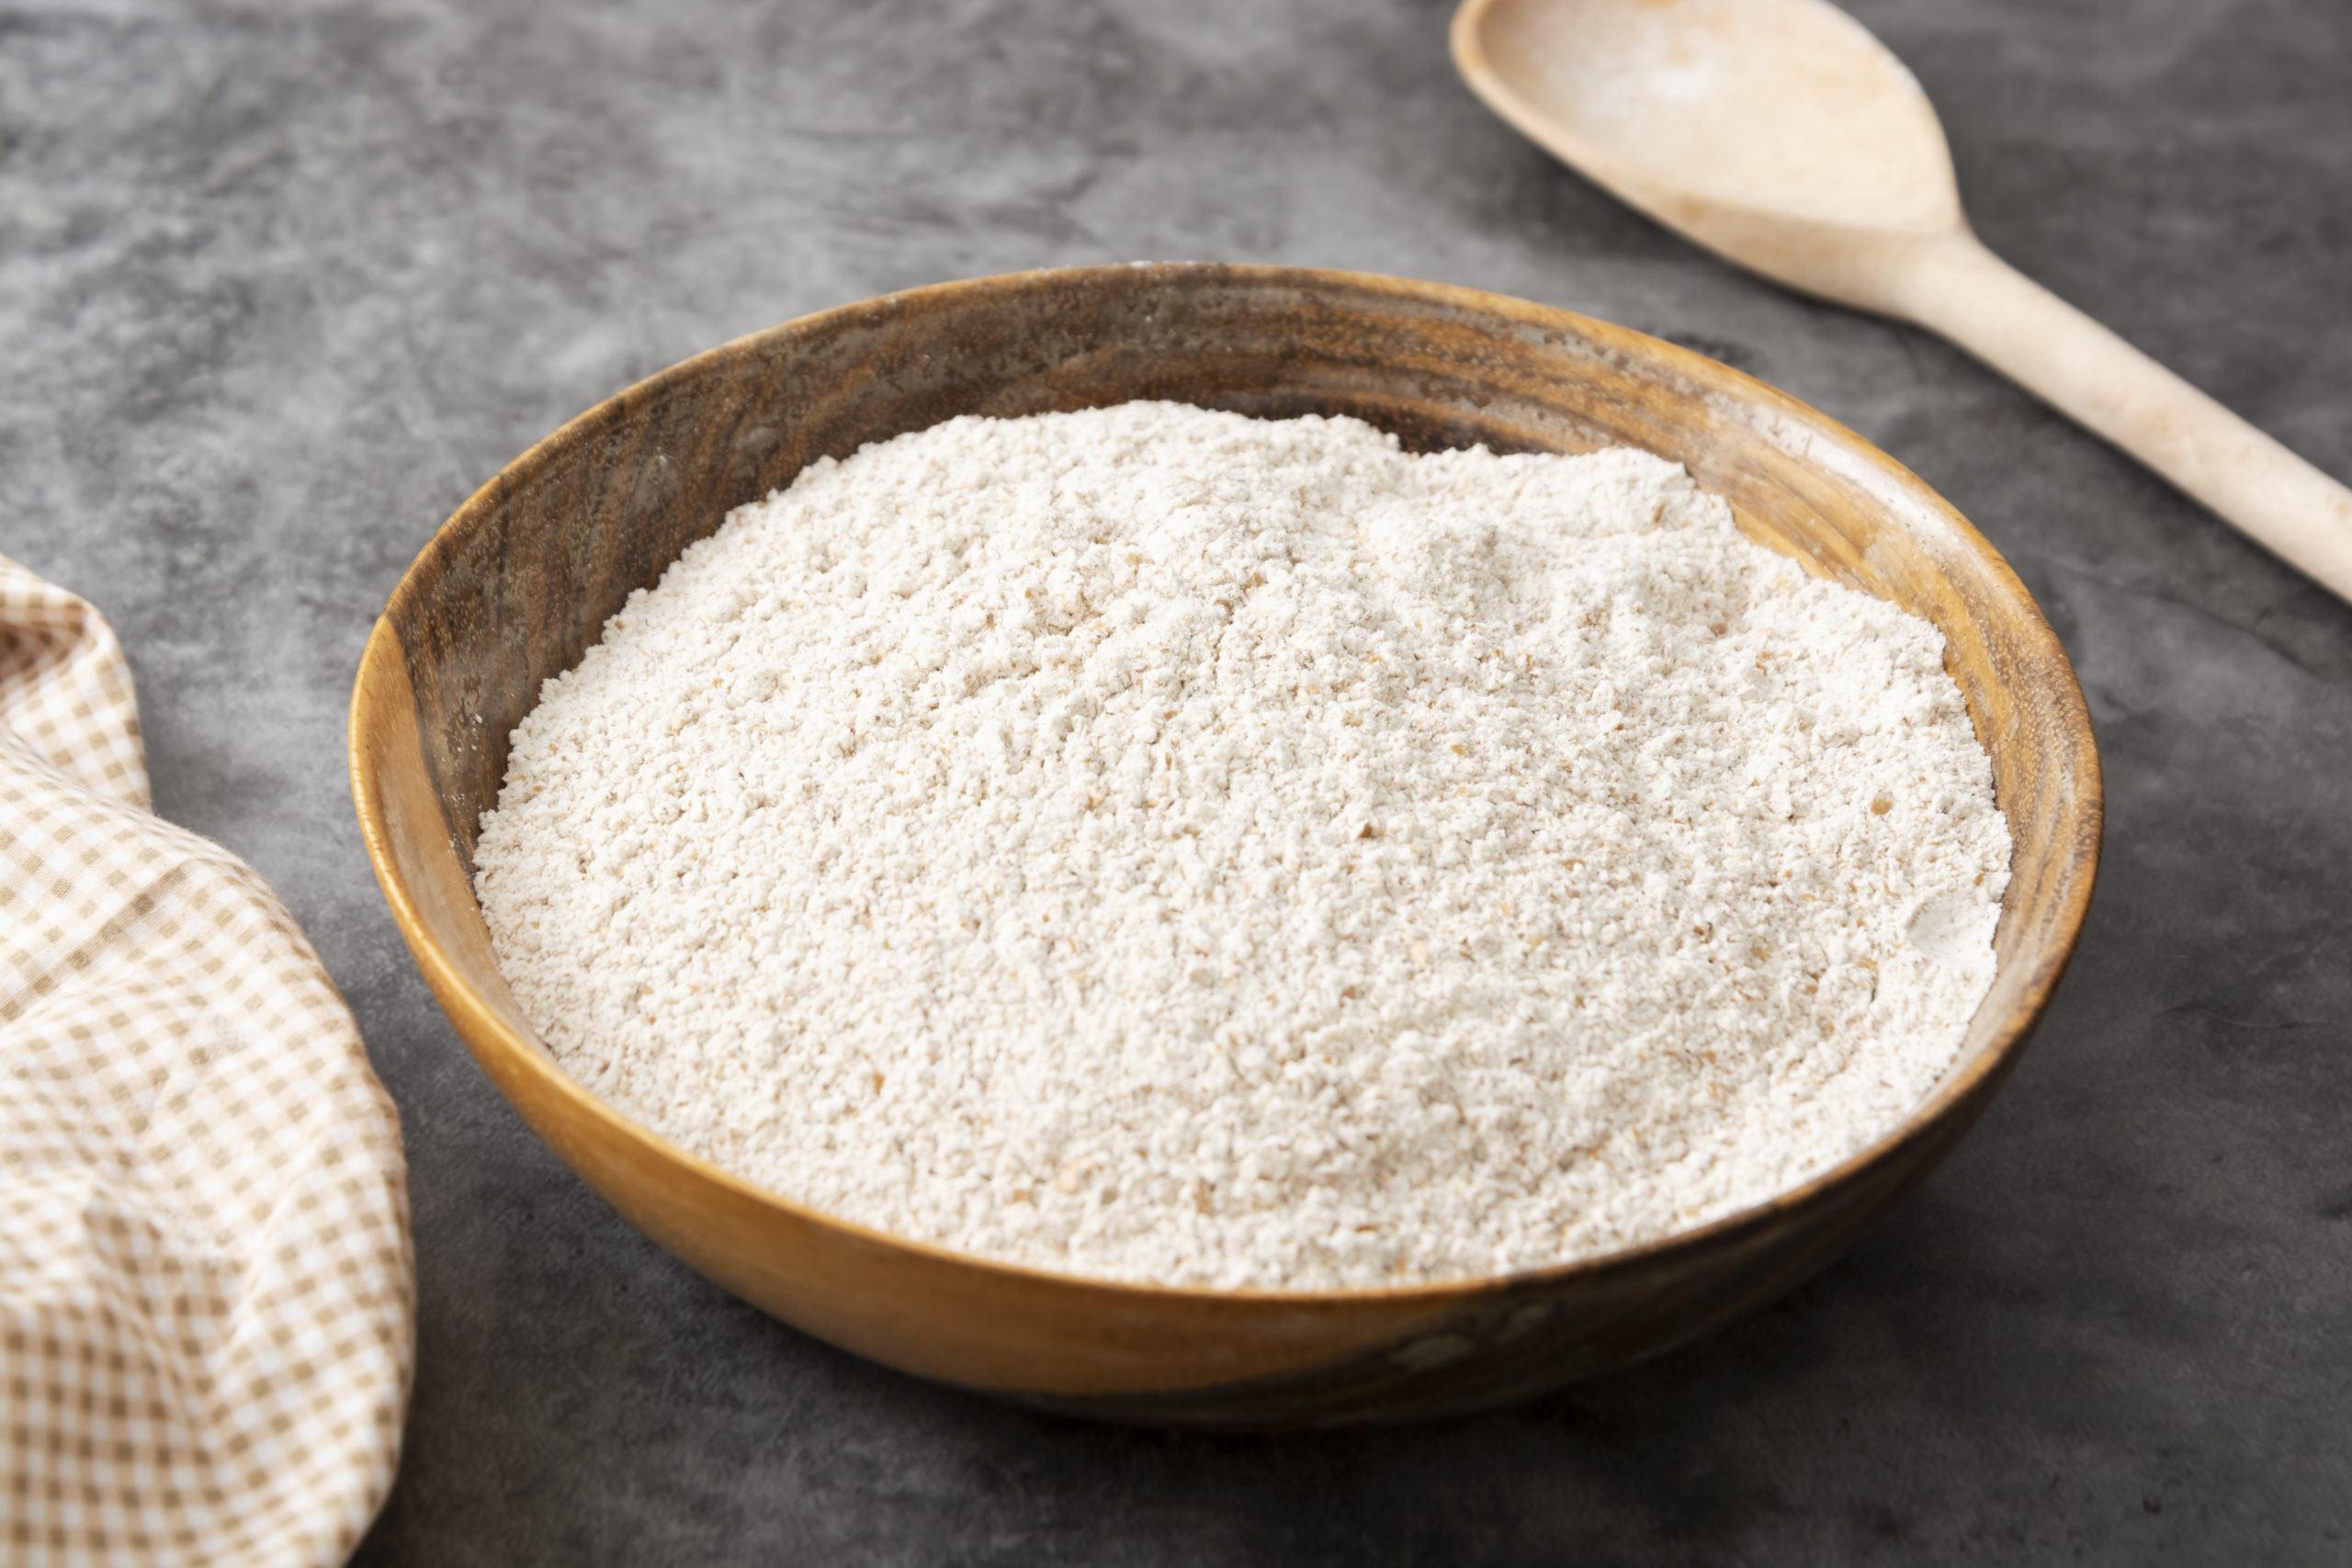 Substitute All-Purpose Flour With Whole Wheat Flour